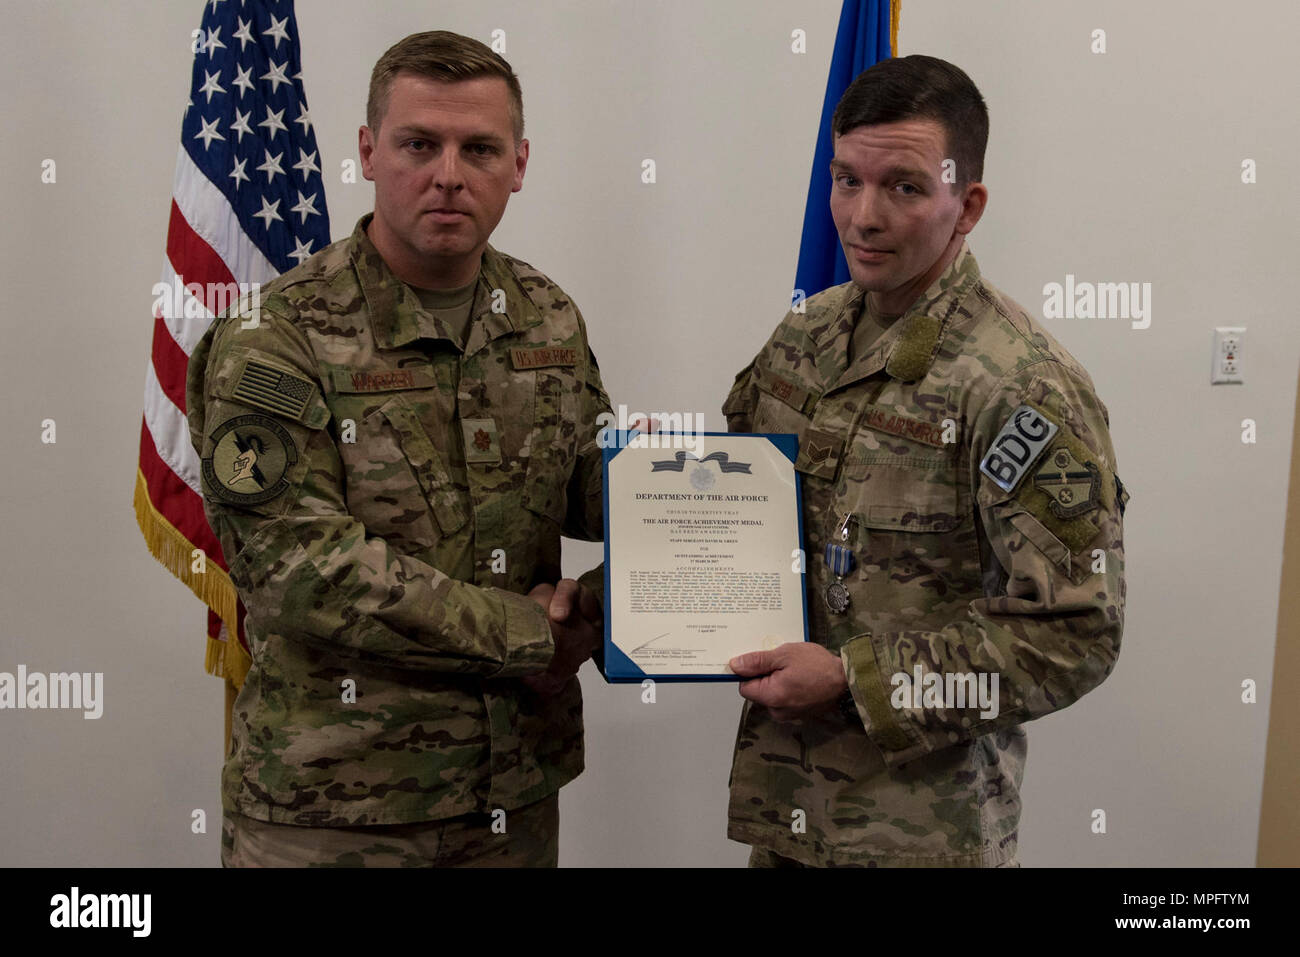 Maj. Michael Warren, 824th Base Defense Squadron commander, awards Staff Sgt. David Green, 824th BDS fireteam leader, with an achievement medal, April 10, 2017, at Moody Air Force Base, Ga. Green received the medal for his act of heroism when he helped a trapped victim during an off-base vehicle incident. Stock Photo